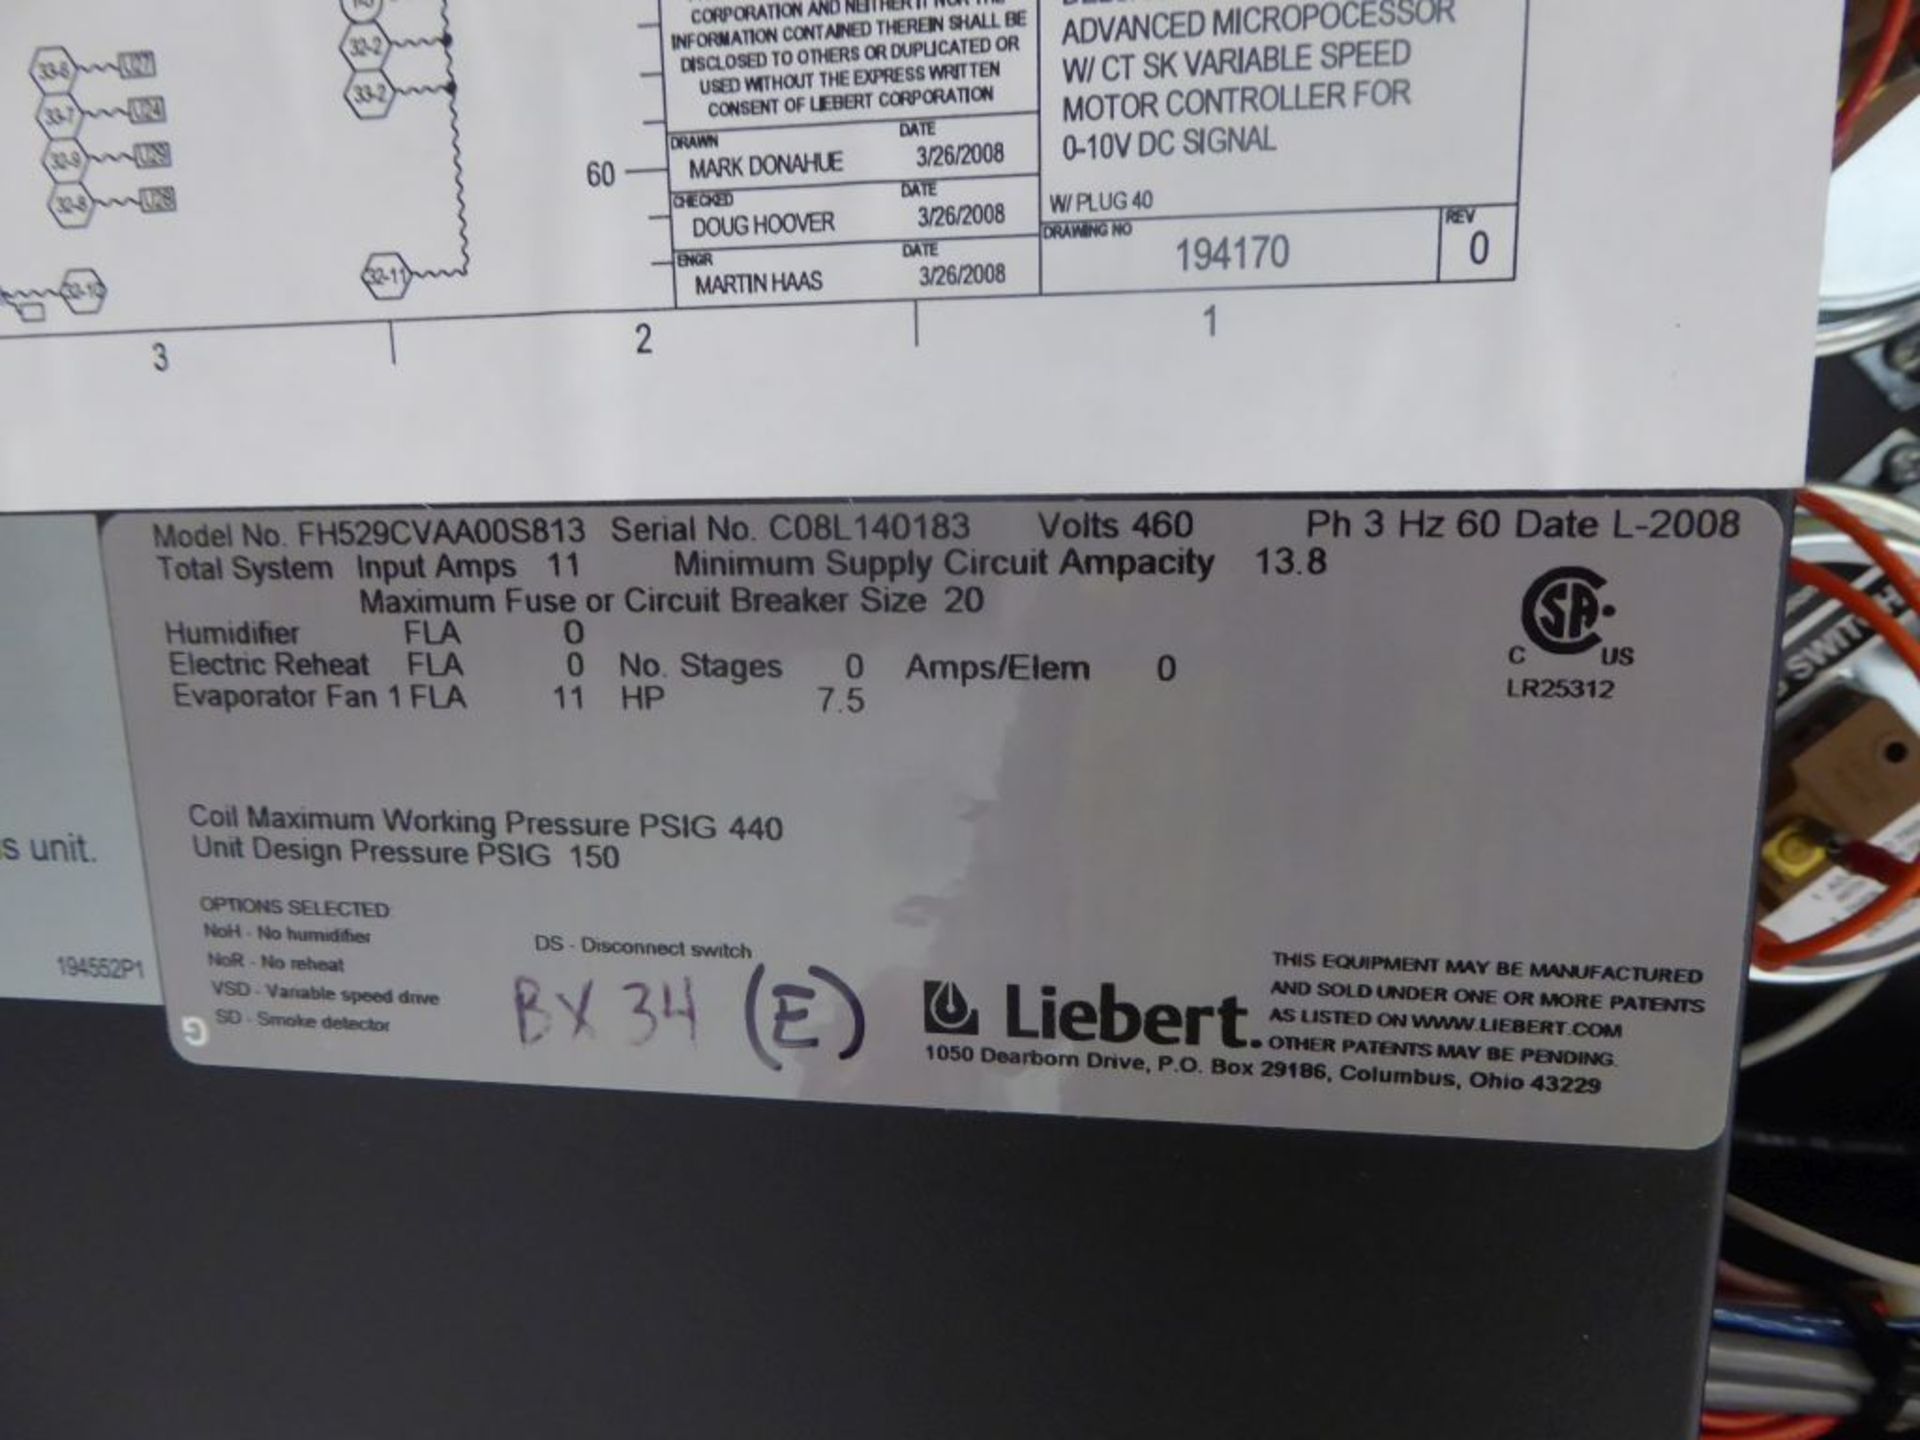 Charlotte, NC - Liebert Deluxe Chilled Water Advanced Microprocessor - Image 3 of 3